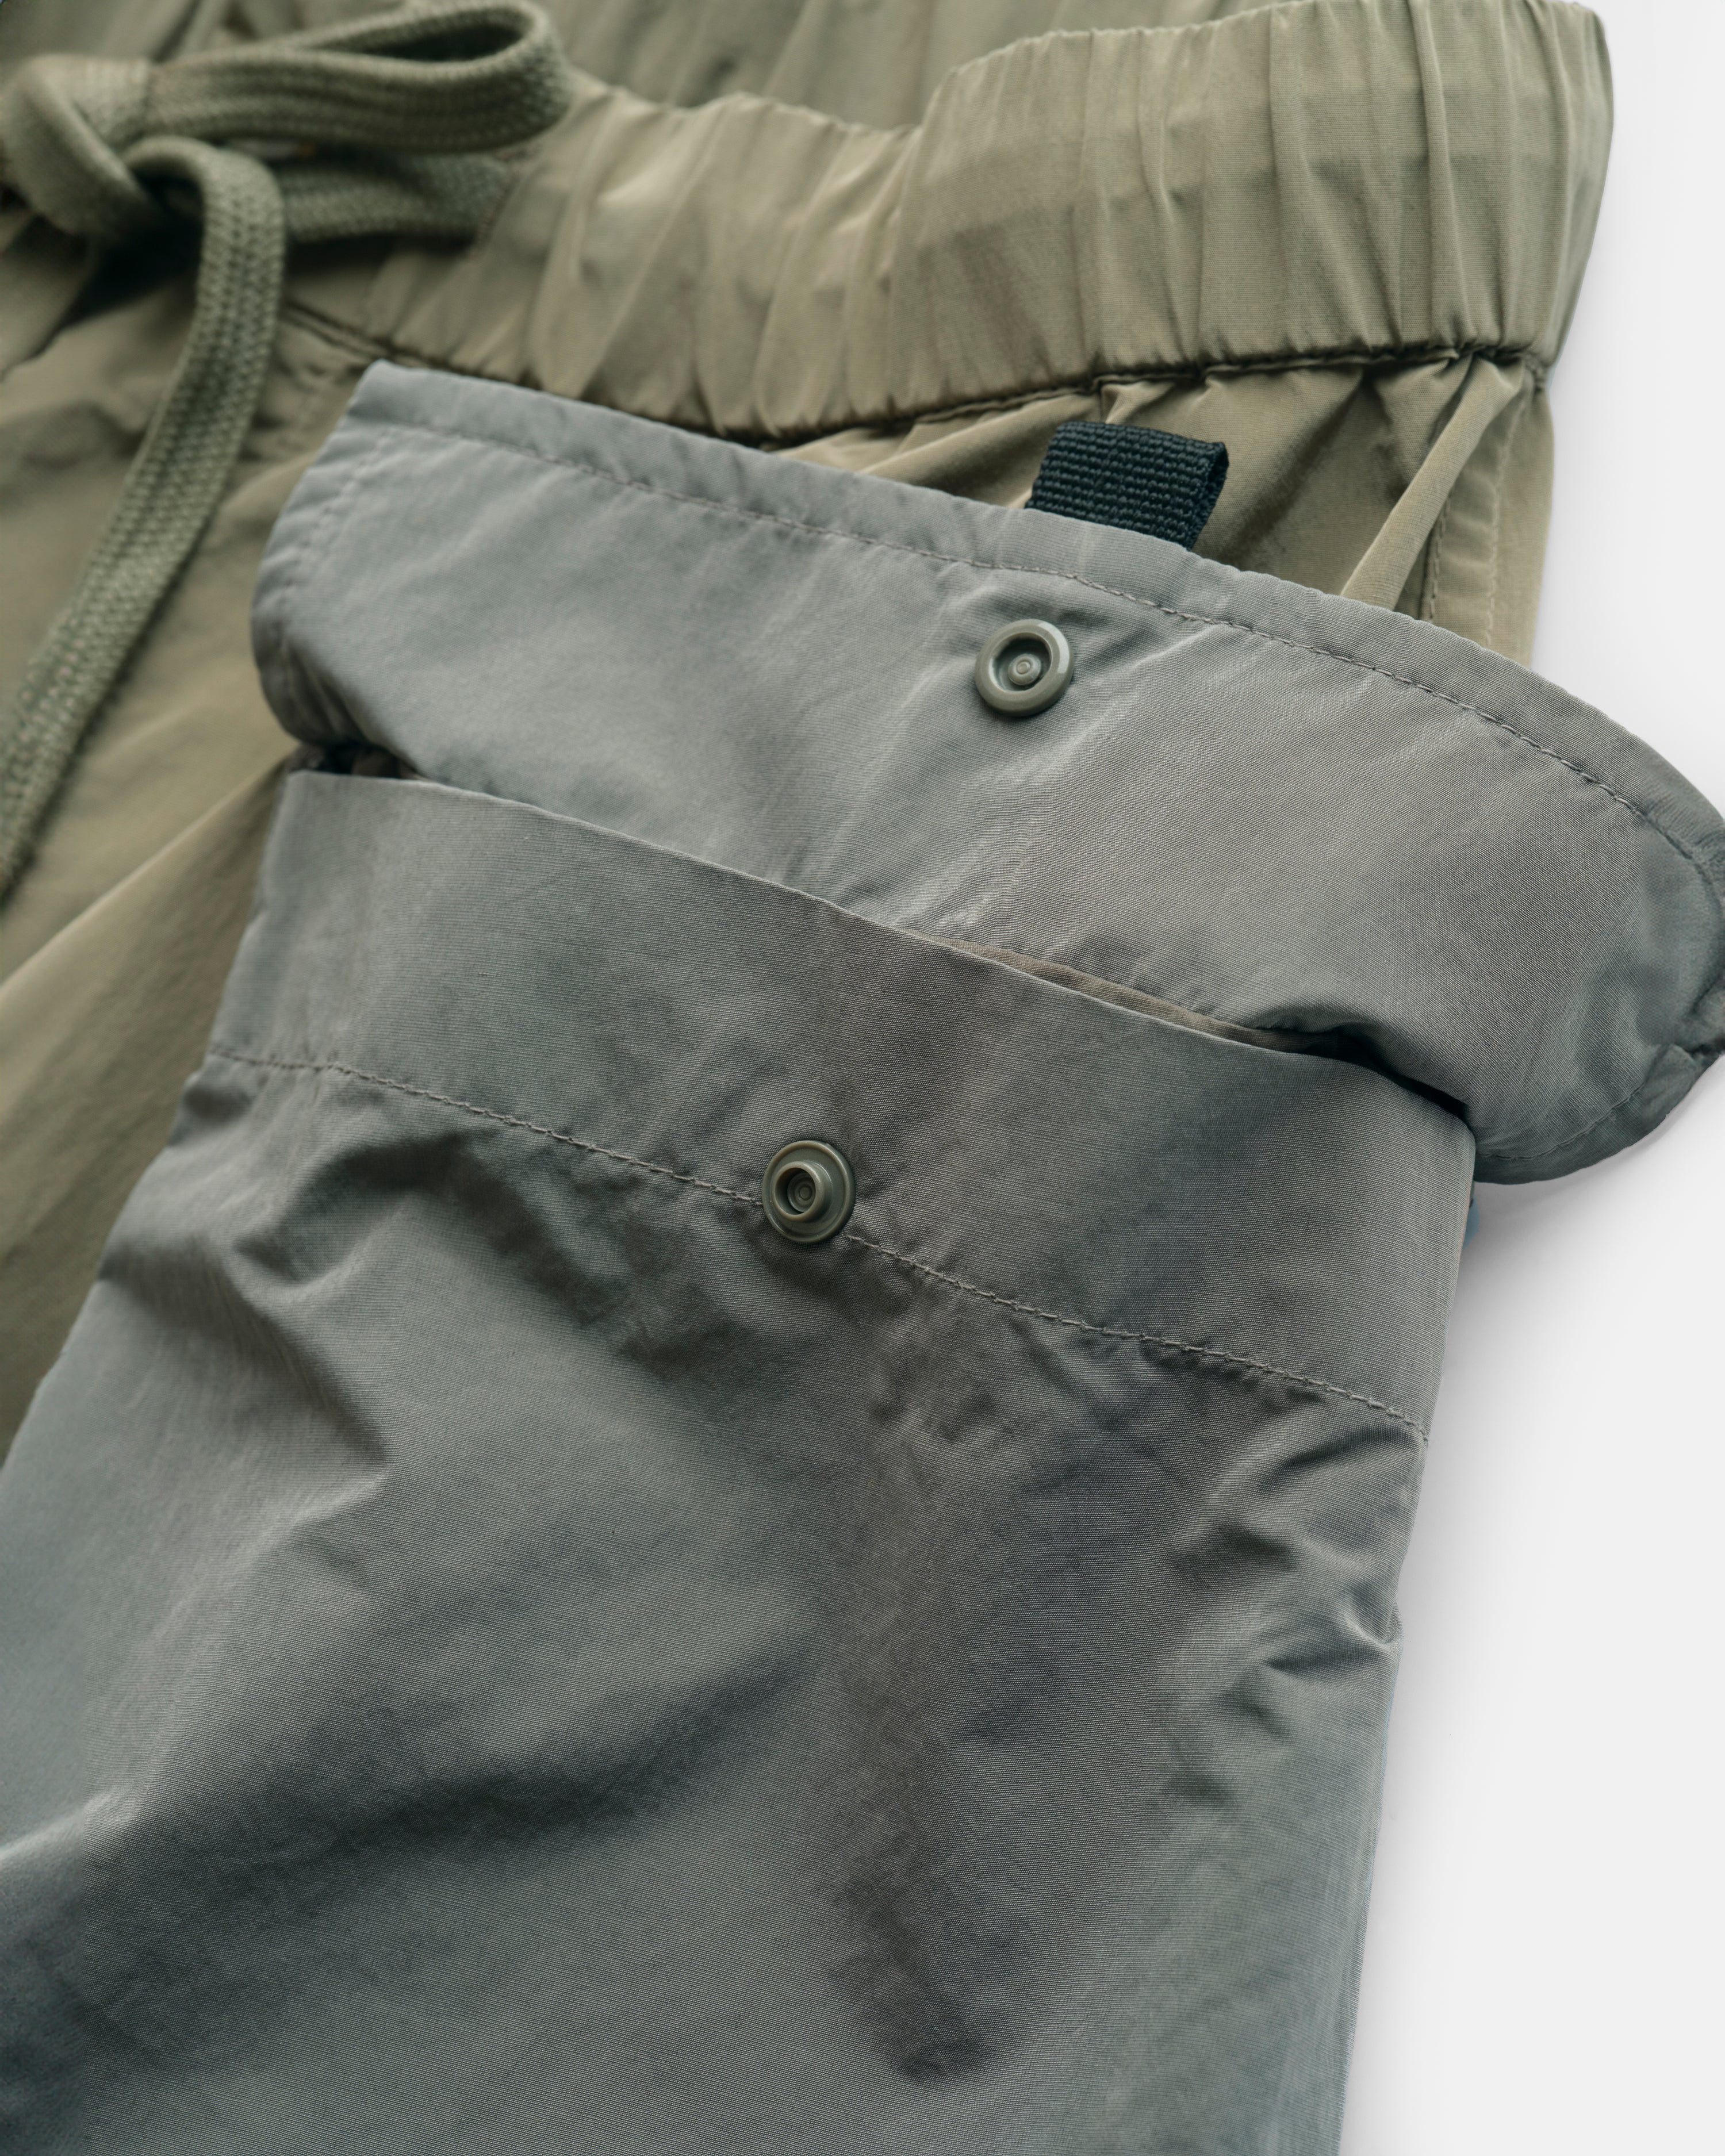 VETTI PANT - SHROOM / GRAY BRUSHED WATER-REPELLENT NYLO